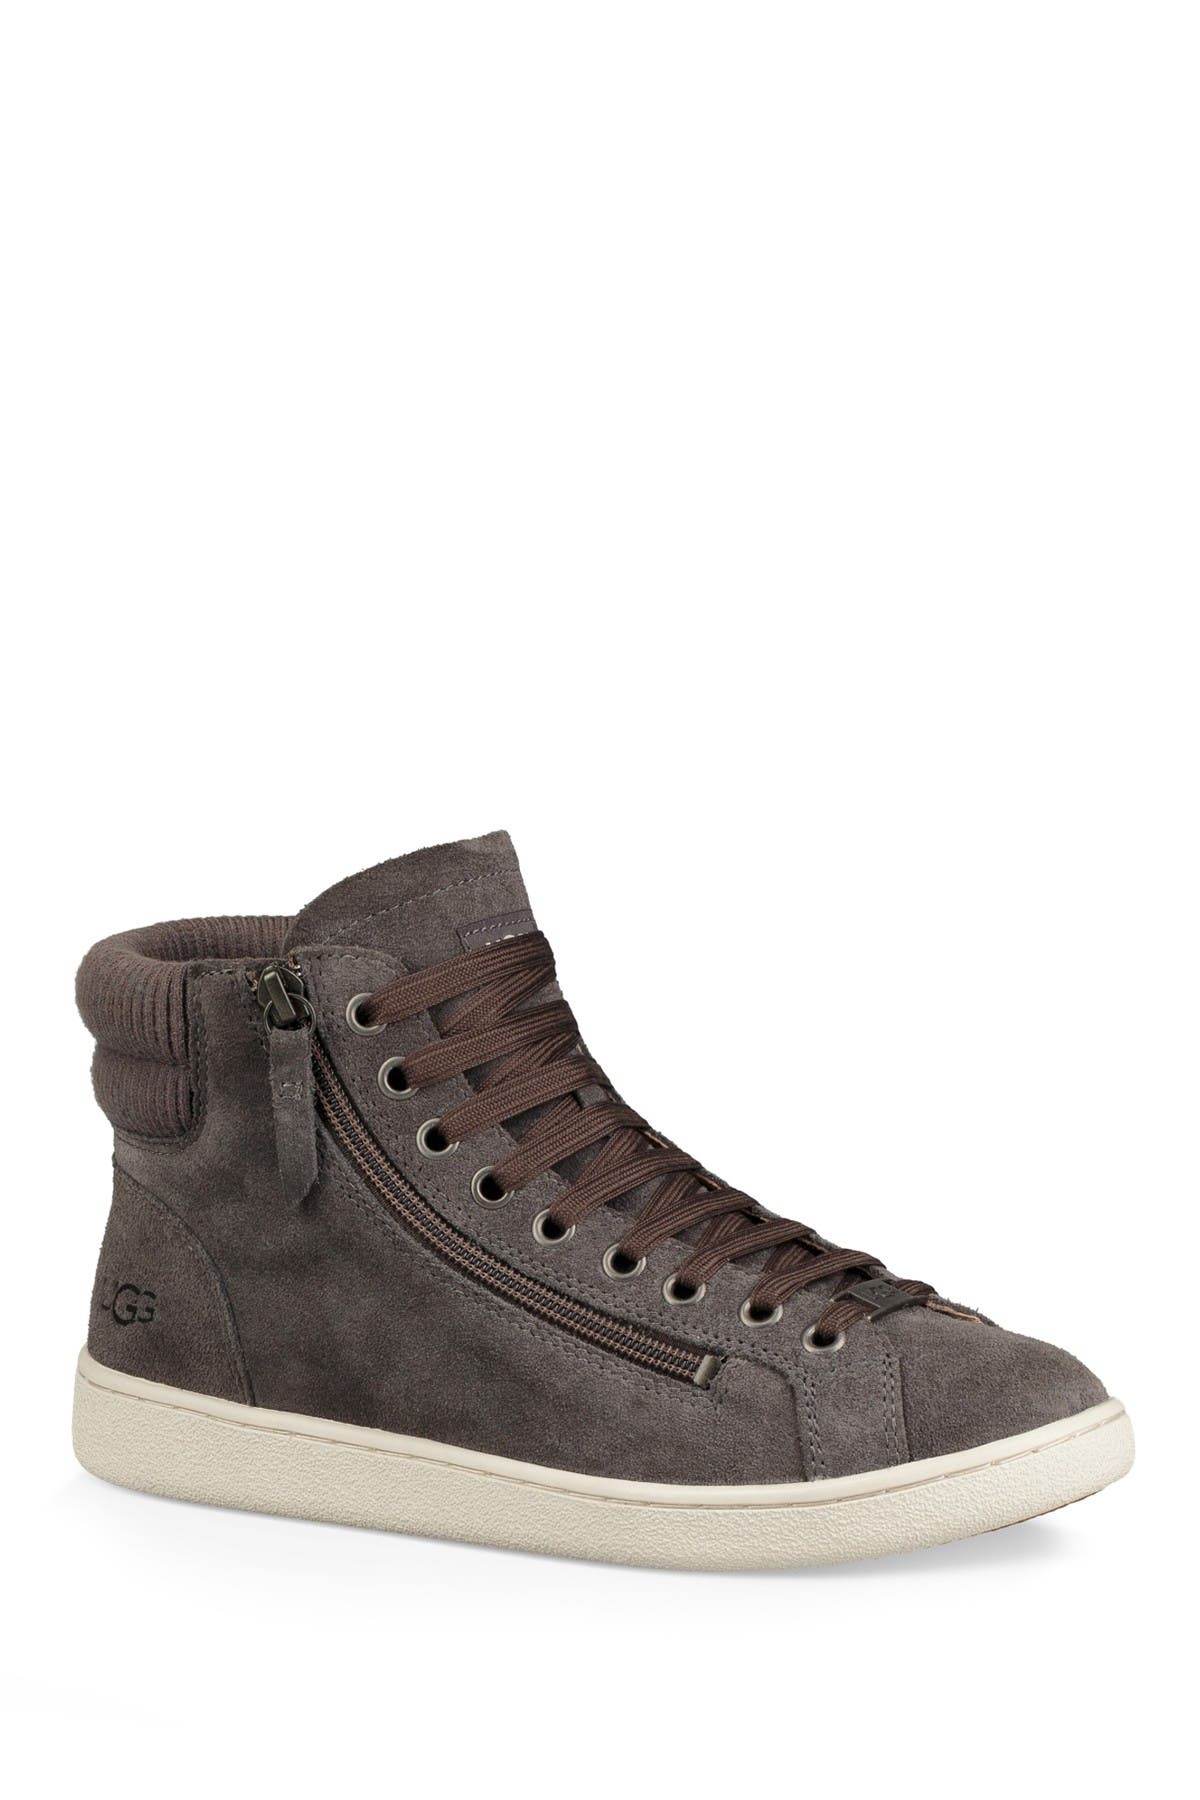 ugg sneakers olive